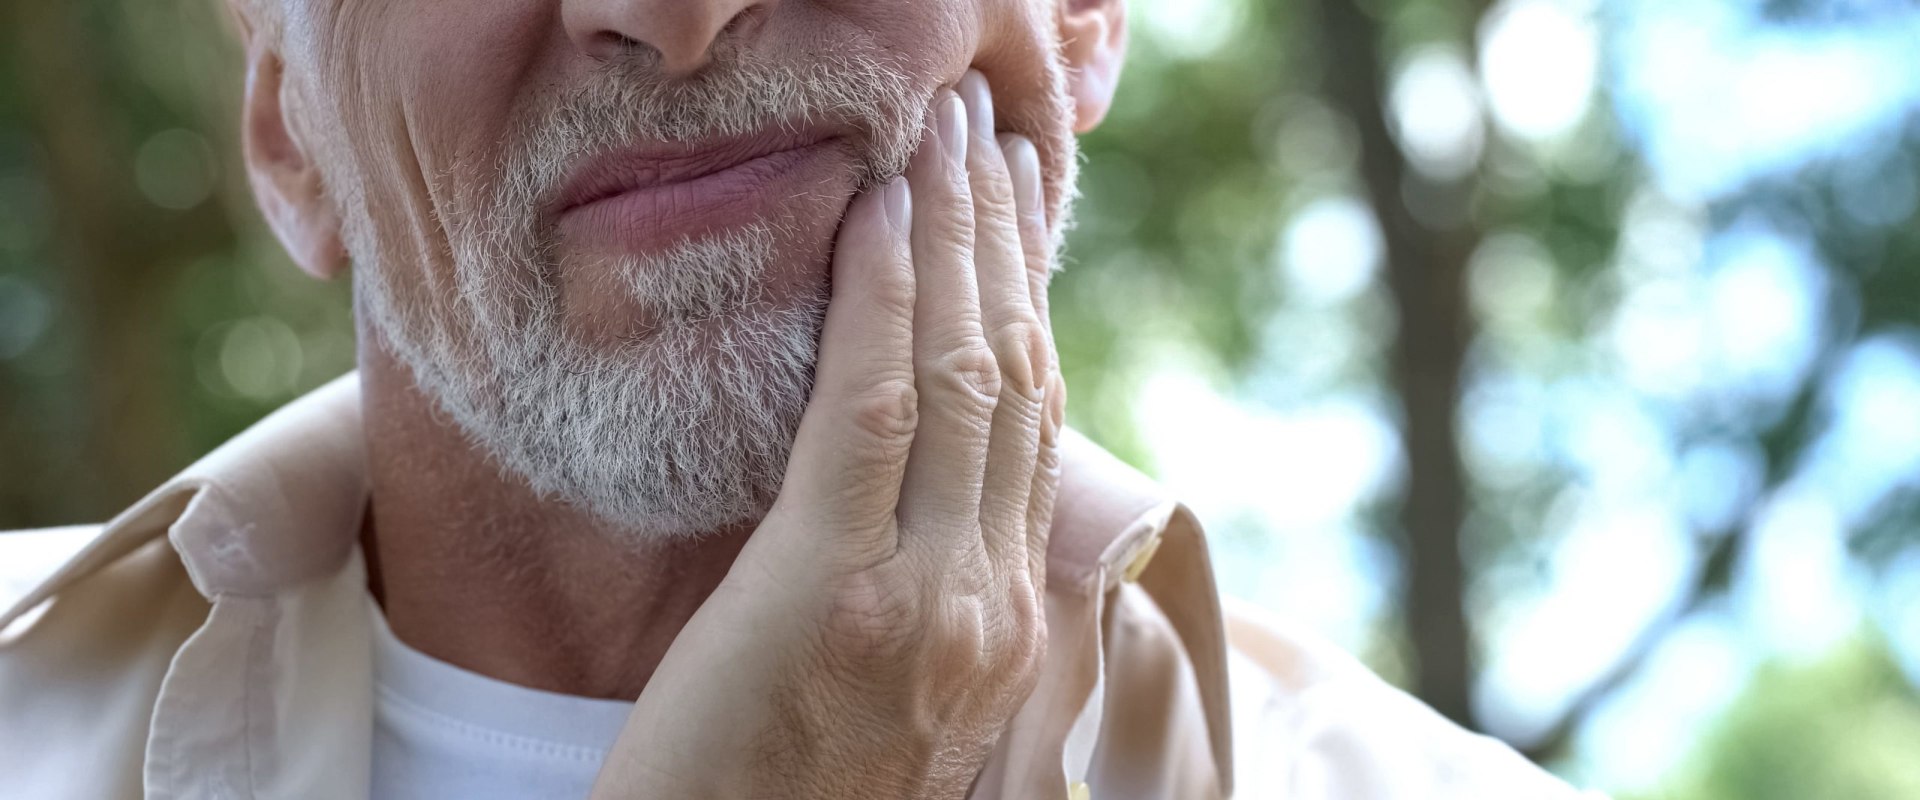 How long until dental implants stop hurting?